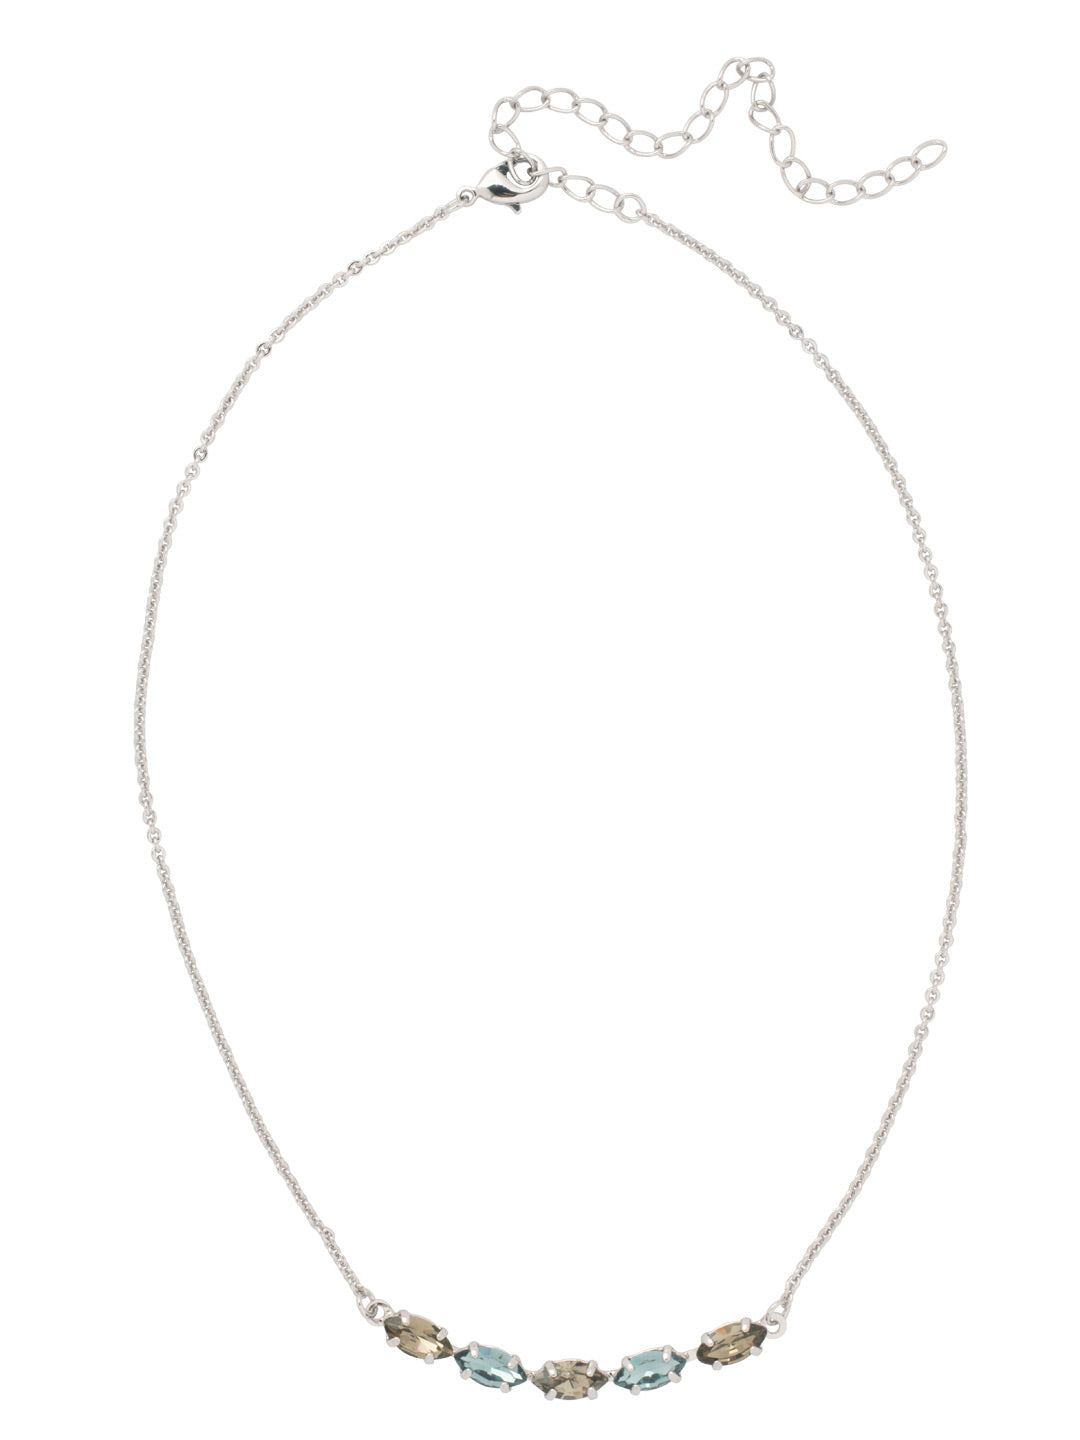 Clarissa Repeating Tennis Necklace - NFL5PDASP